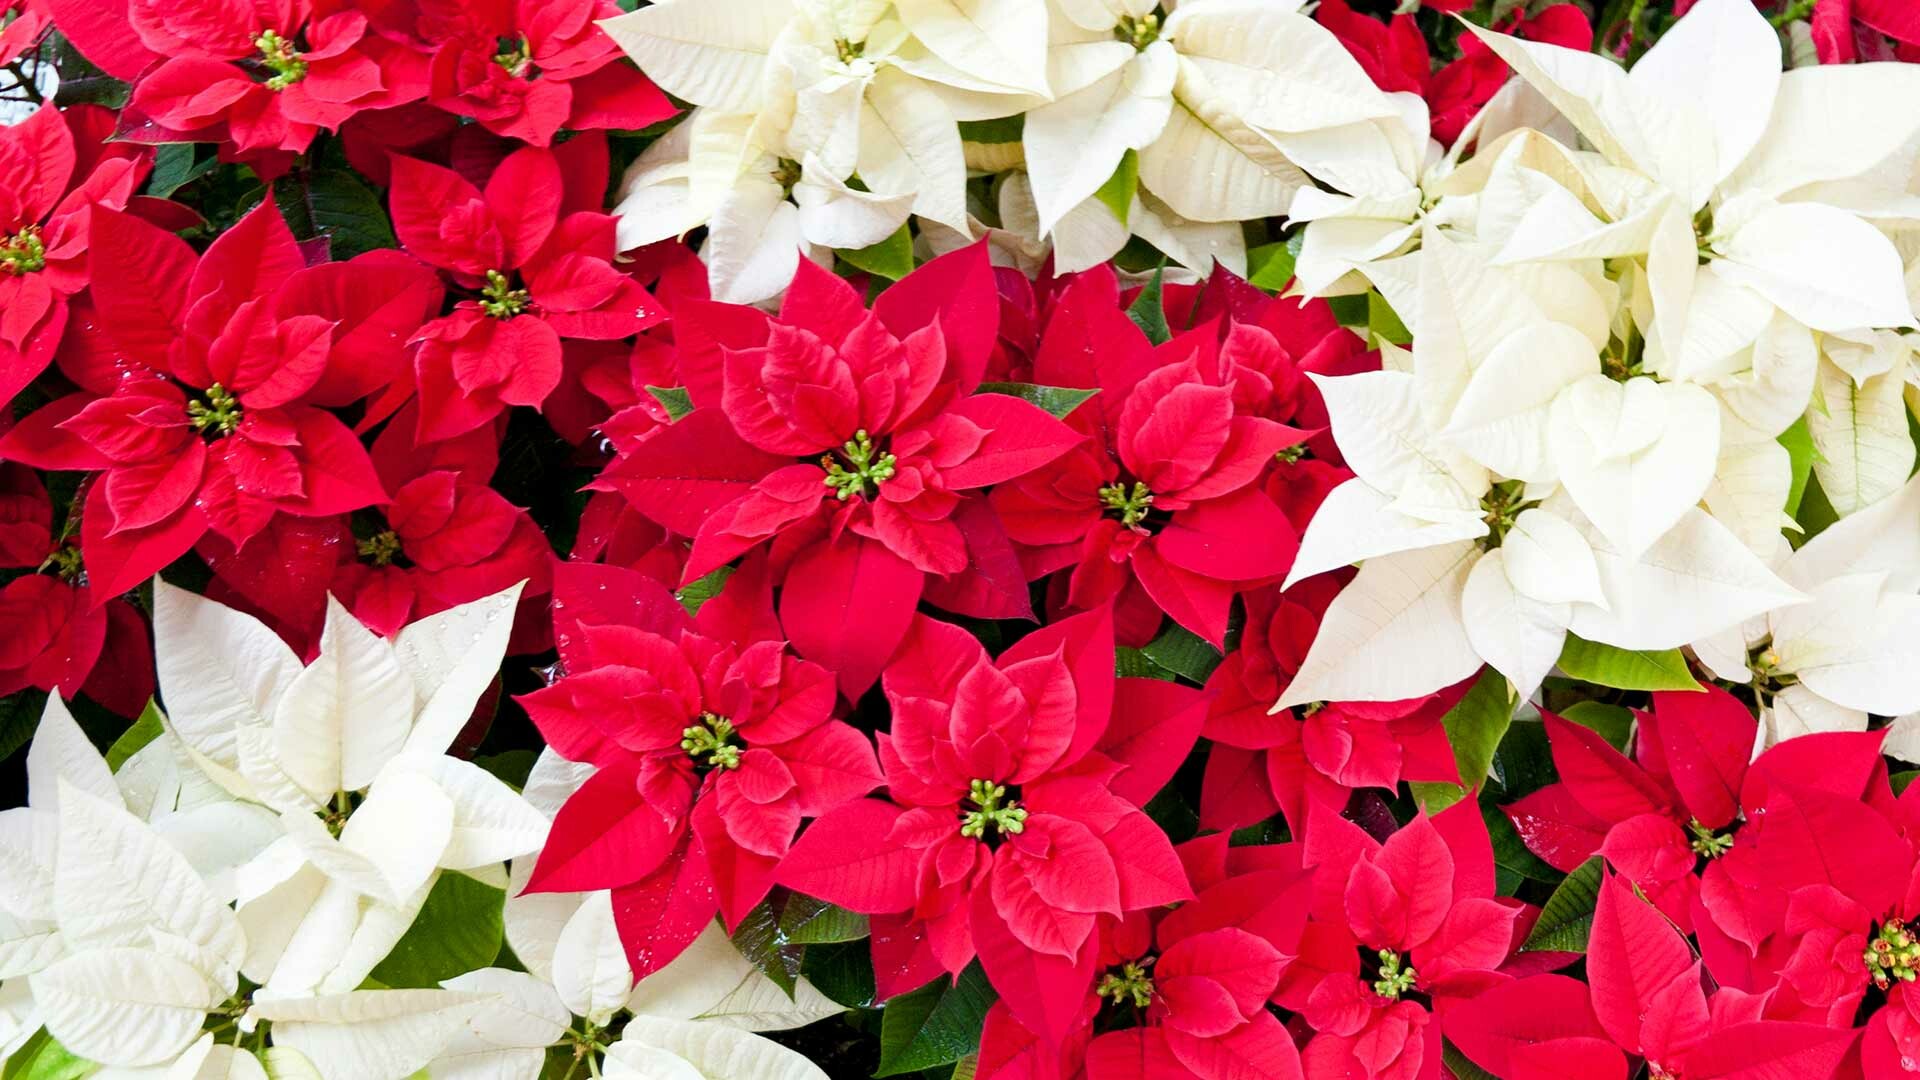 Year-round care, Poinsettia maintenance, Constant floral beauty, Everlasting elegance, 1920x1080 Full HD Desktop